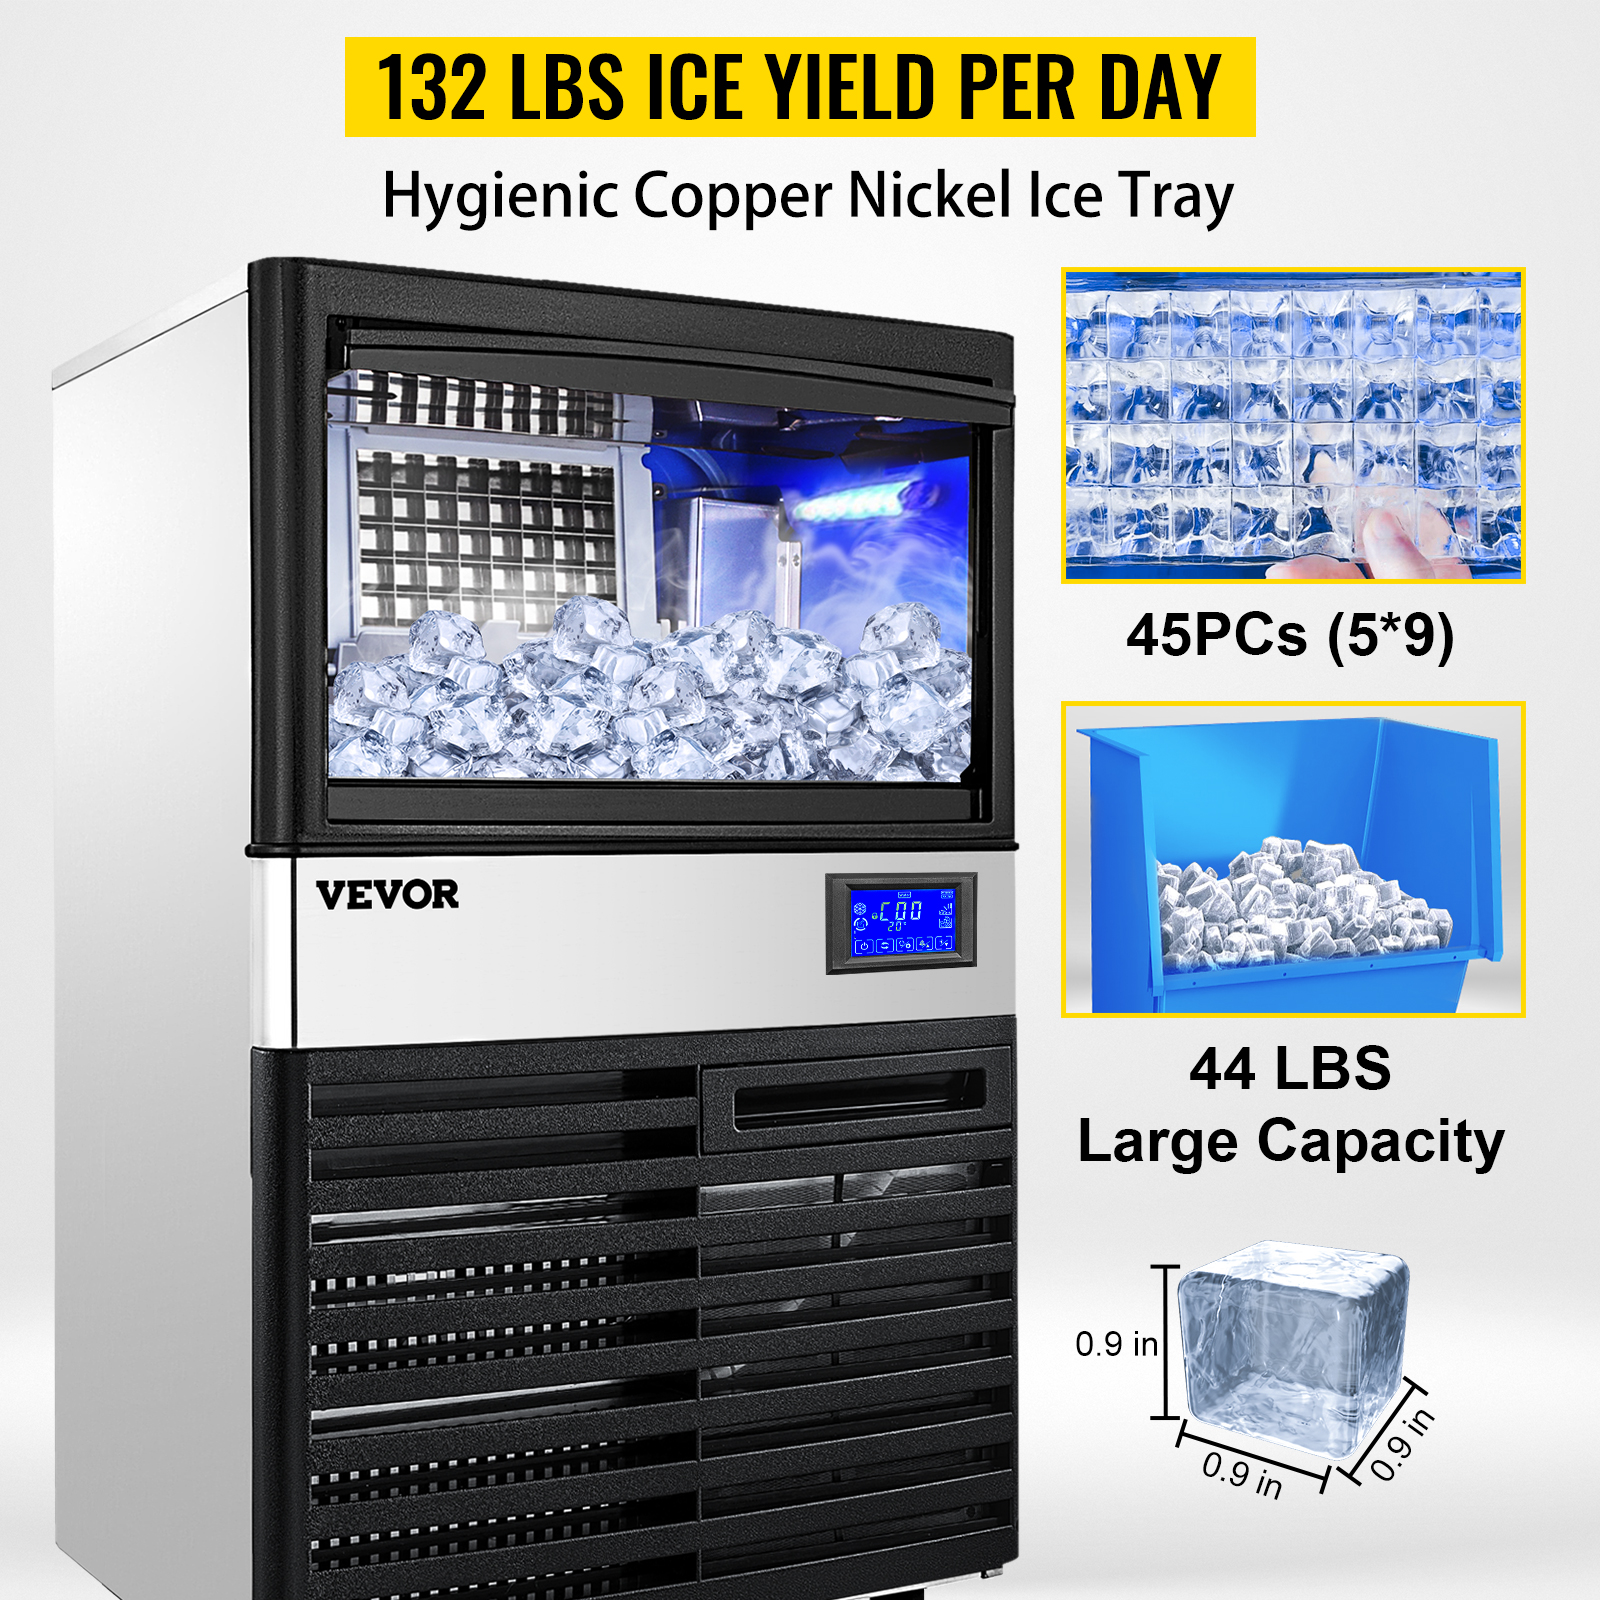 VEVOR 110V Commercial Snowflake Ice Maker 88lbs/24h, ETL Approved, Food  Grade Stainless Steel Construction, Automatic Operation, Freeatanding,  Water Filter and Spoon, Perfect for Seafood Restaurant 